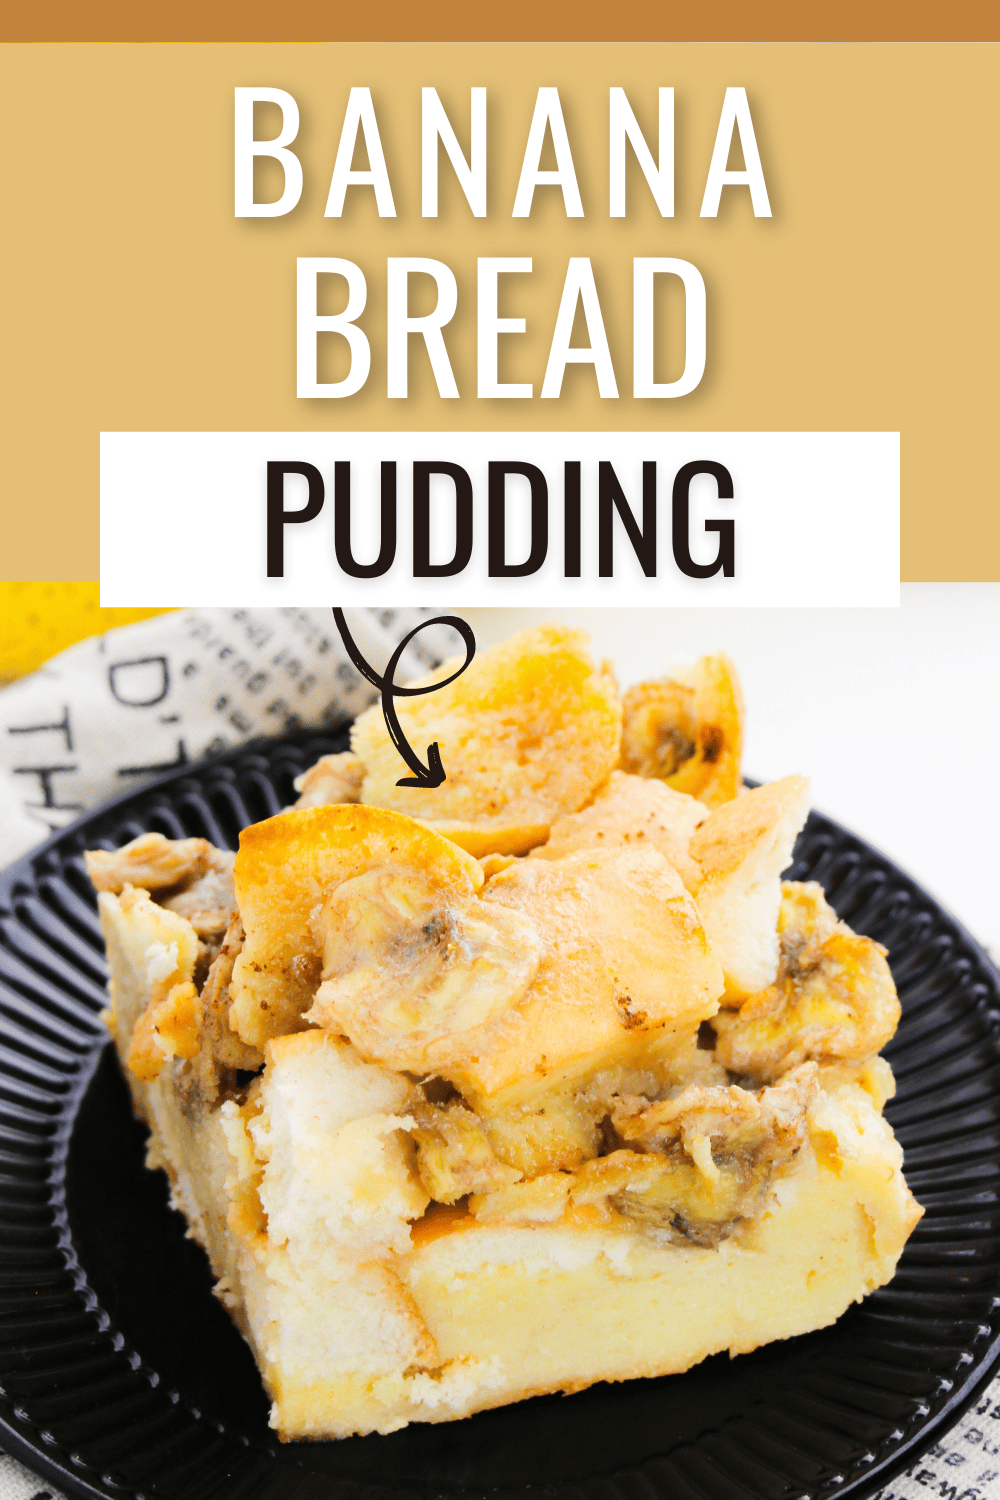 Banana bread pudding is a classic comfort food that never gets old. It is made with cinnamon and brown sugar for a delicious, sweet flavor. #bananabreadpudding #breadpudding #bananabread #comfortfood via @wondermomwannab